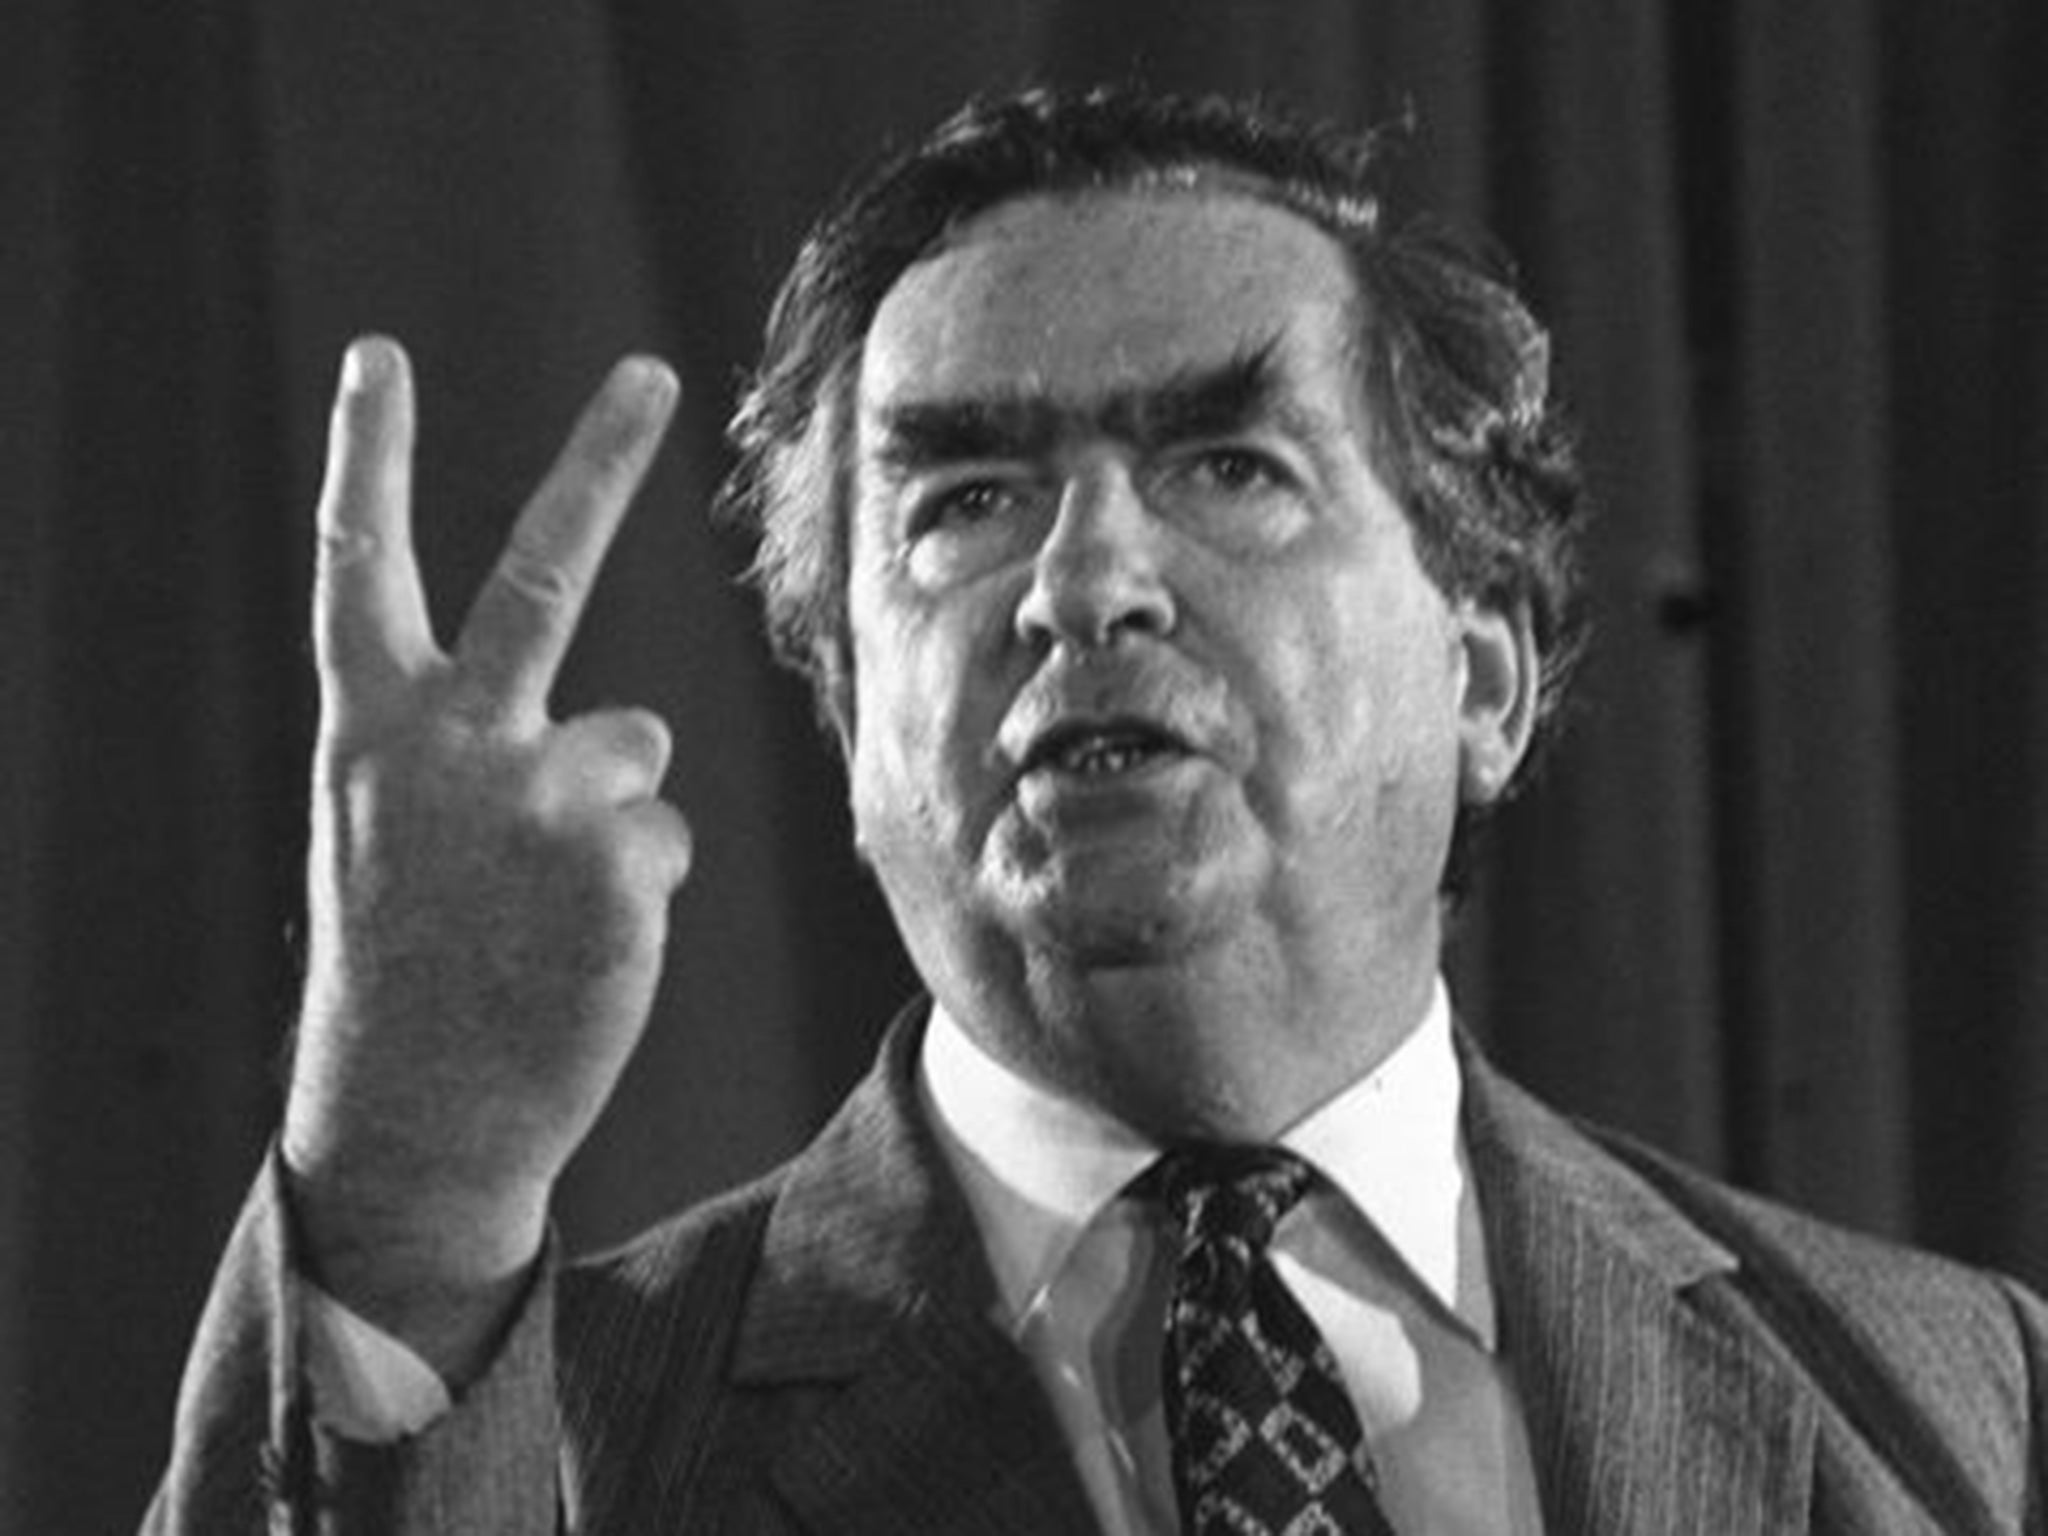 Denis Healey died peacefully in his sleep at his home in Sussex